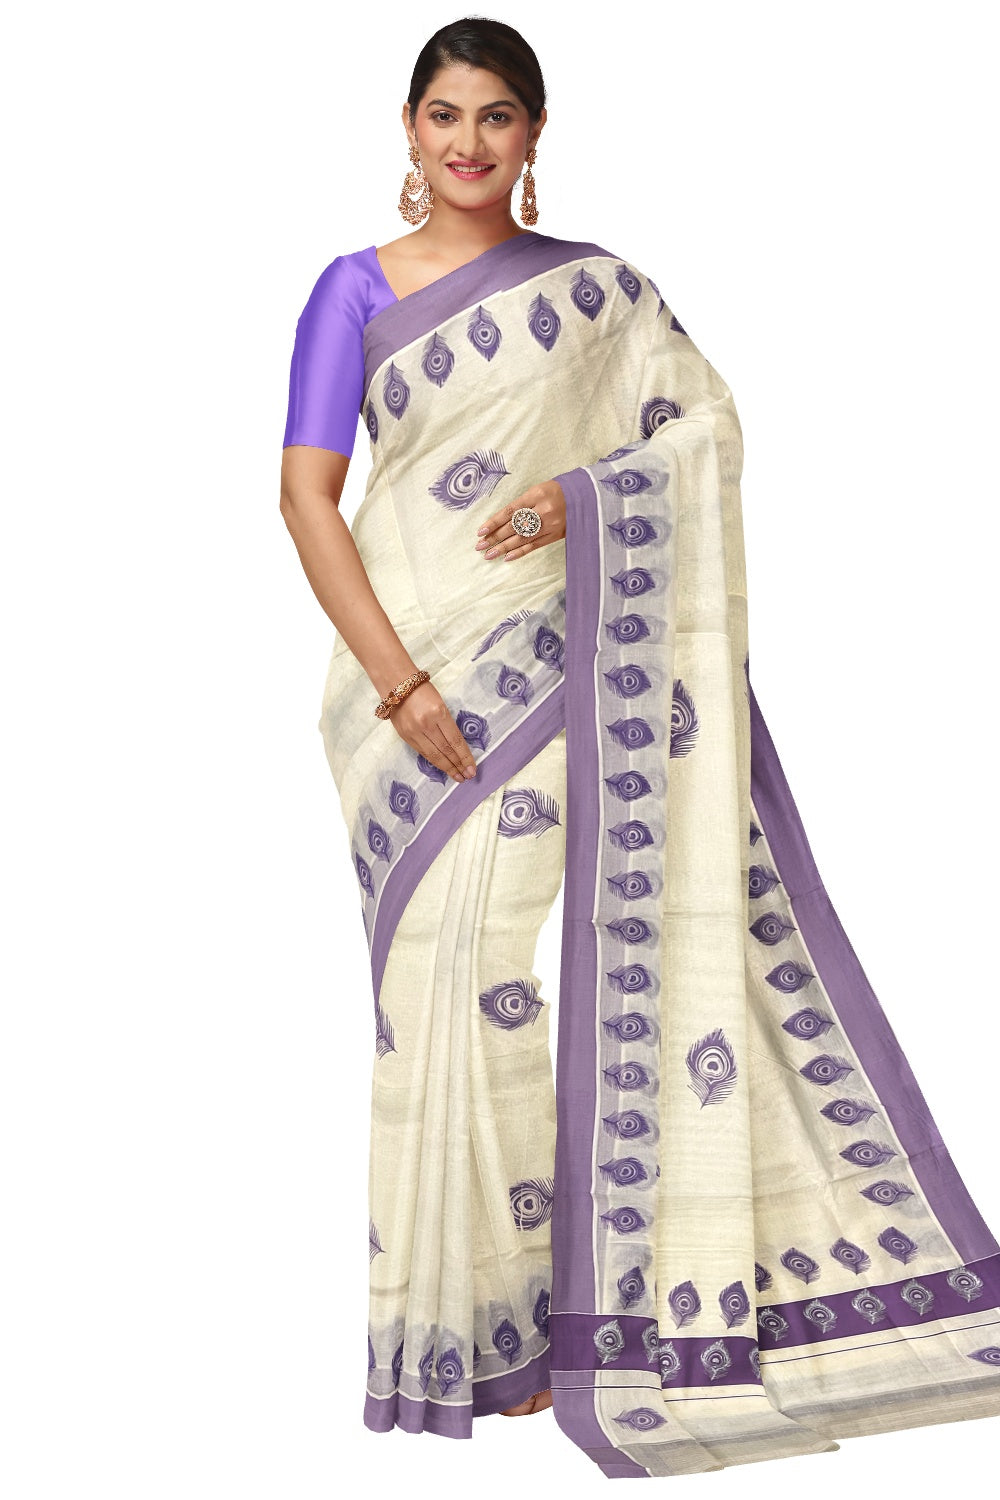 Off White Pure Cotton Kerala Saree with Peacock Feather Block Prints on Violet Border and Tassels on Pallu